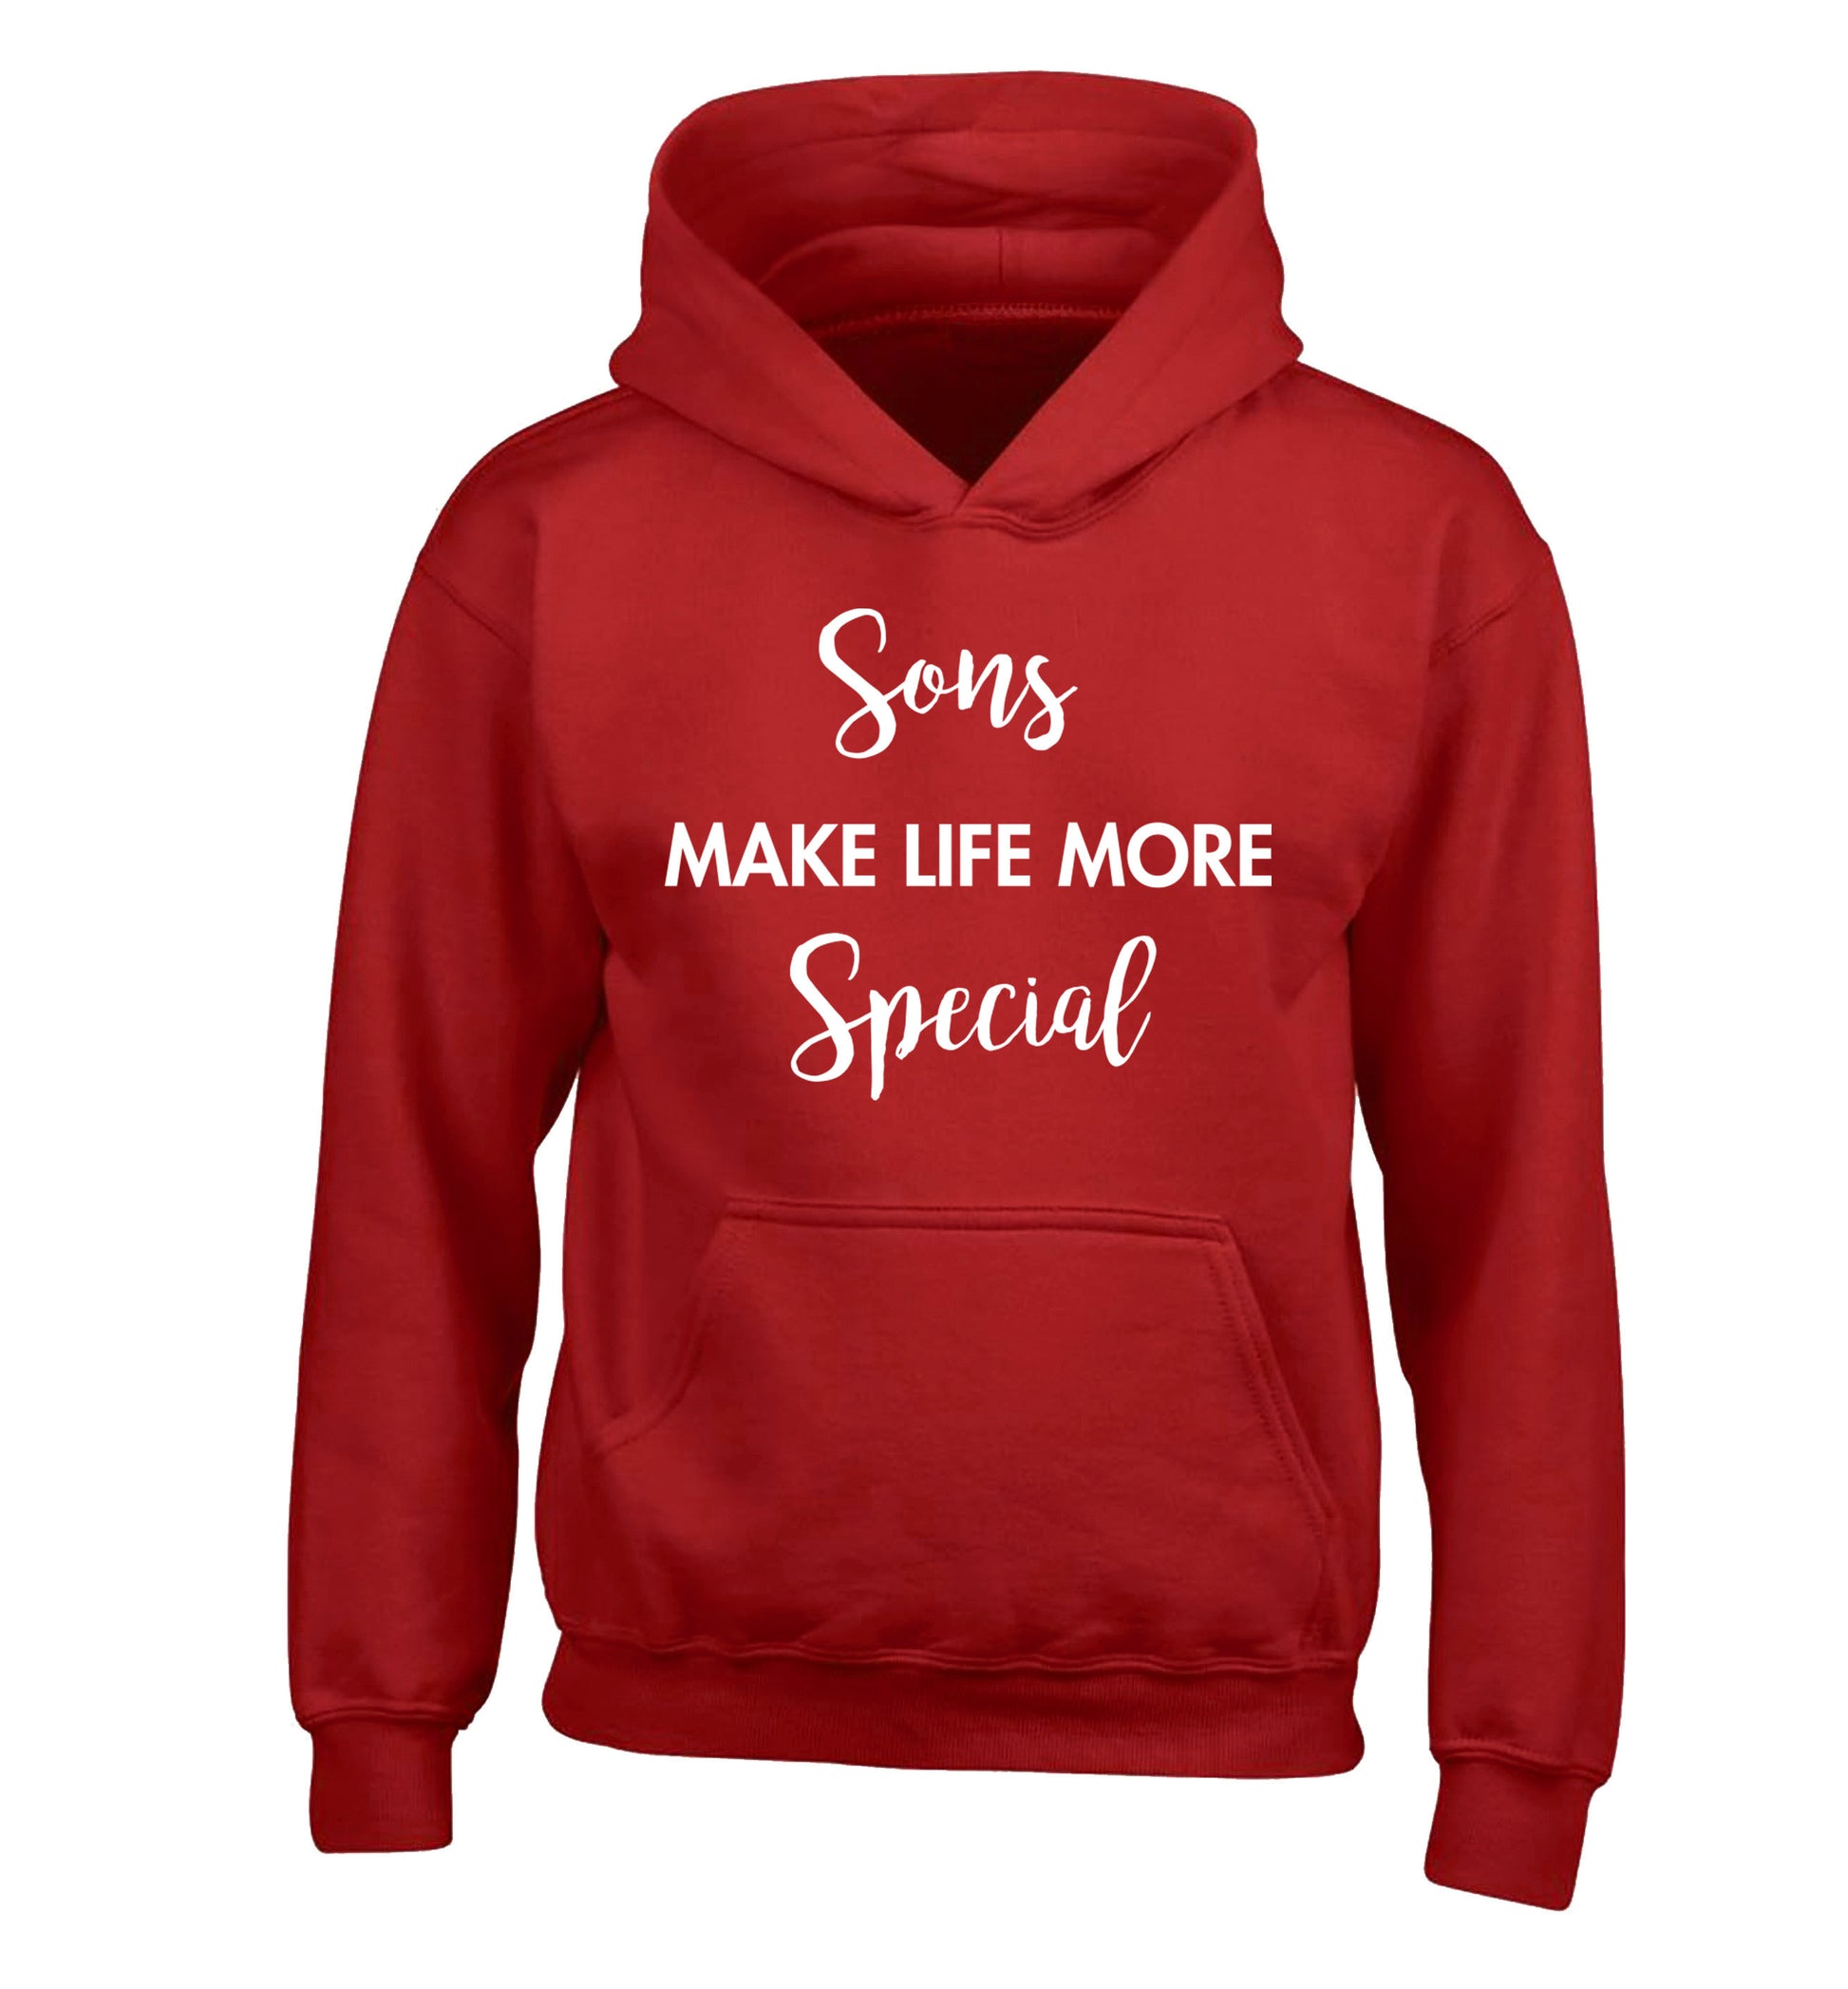 Sons make life more special children's red hoodie 12-14 Years